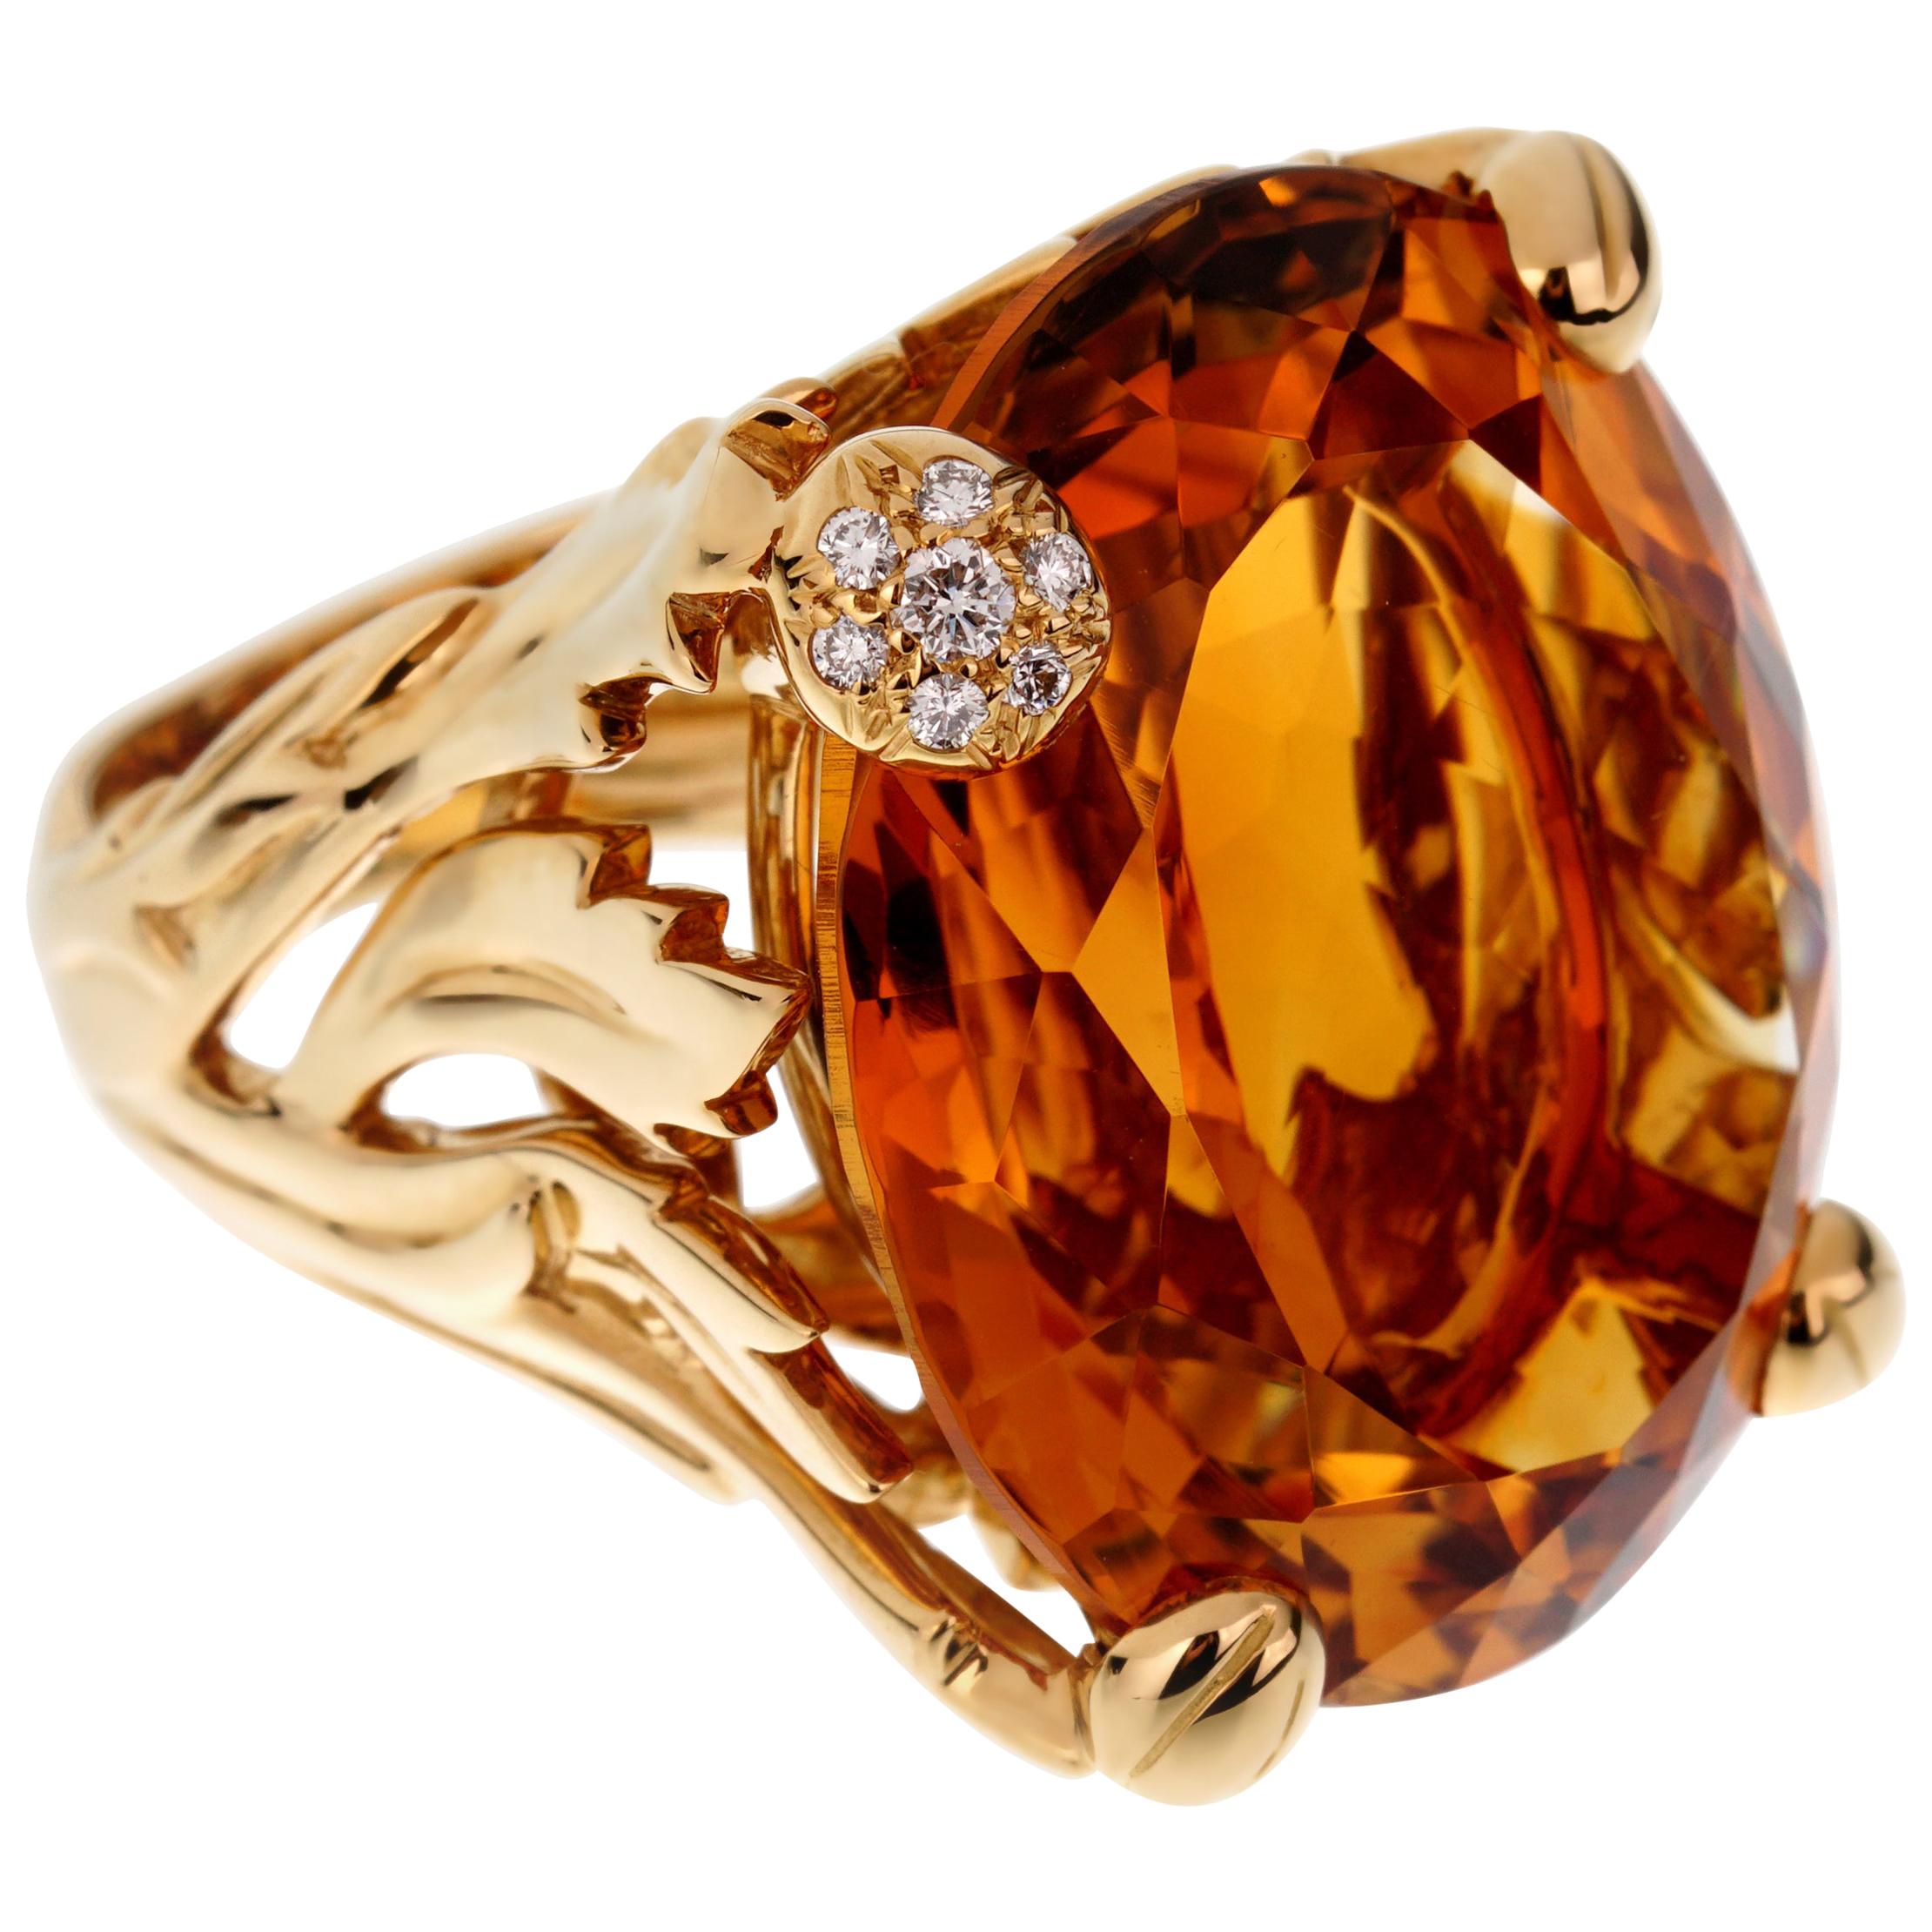 Christian Dior 44.5 Carat Citrine Diamond Cocktail Yellow Gold Ring For Sale